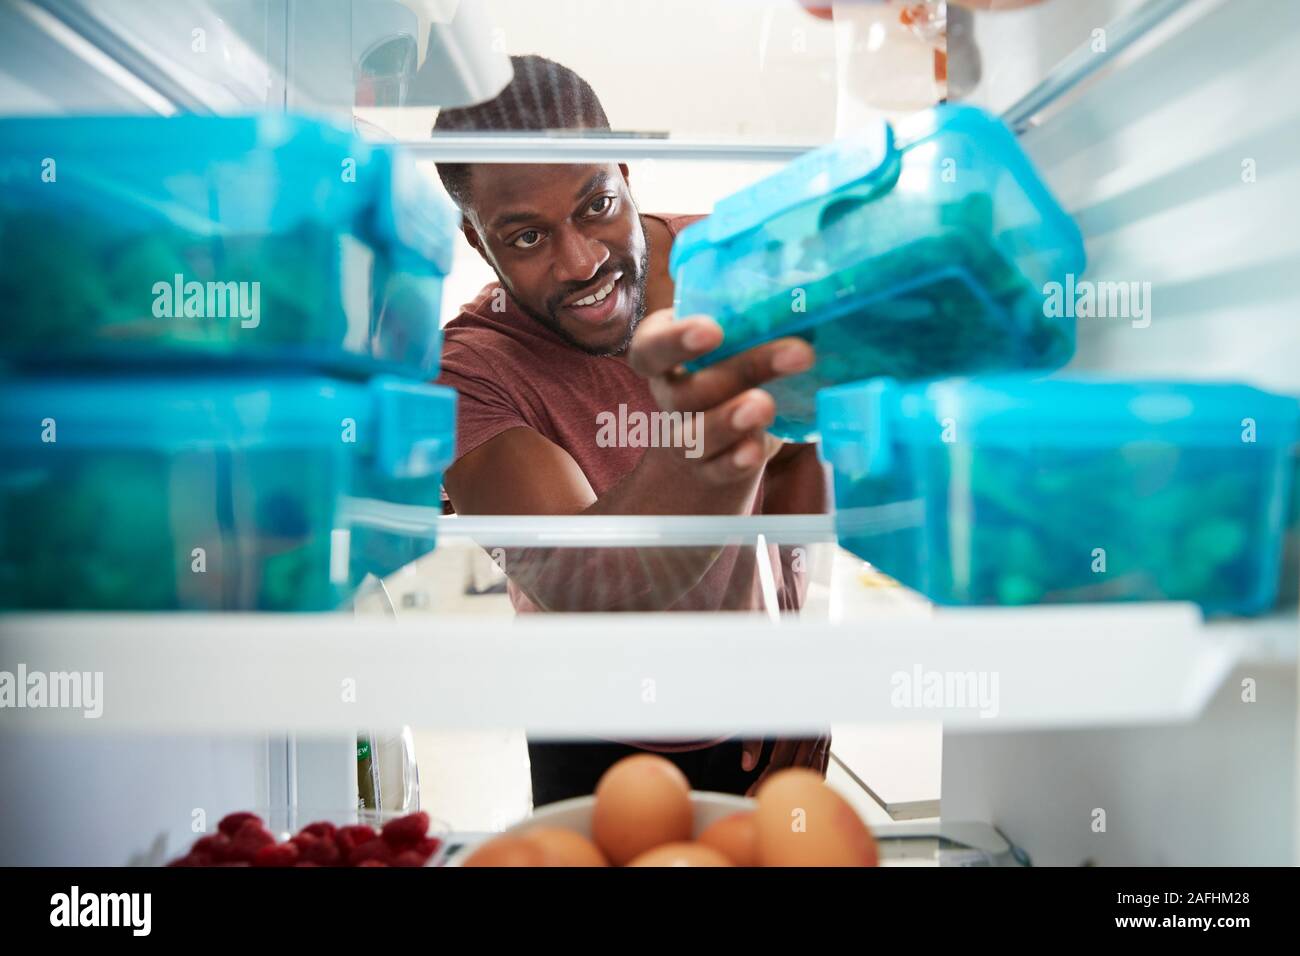 View Looking Out From Inside Of Refrigerator As Man Takes Out Healthy Packed Lunch In Container Stock Photo